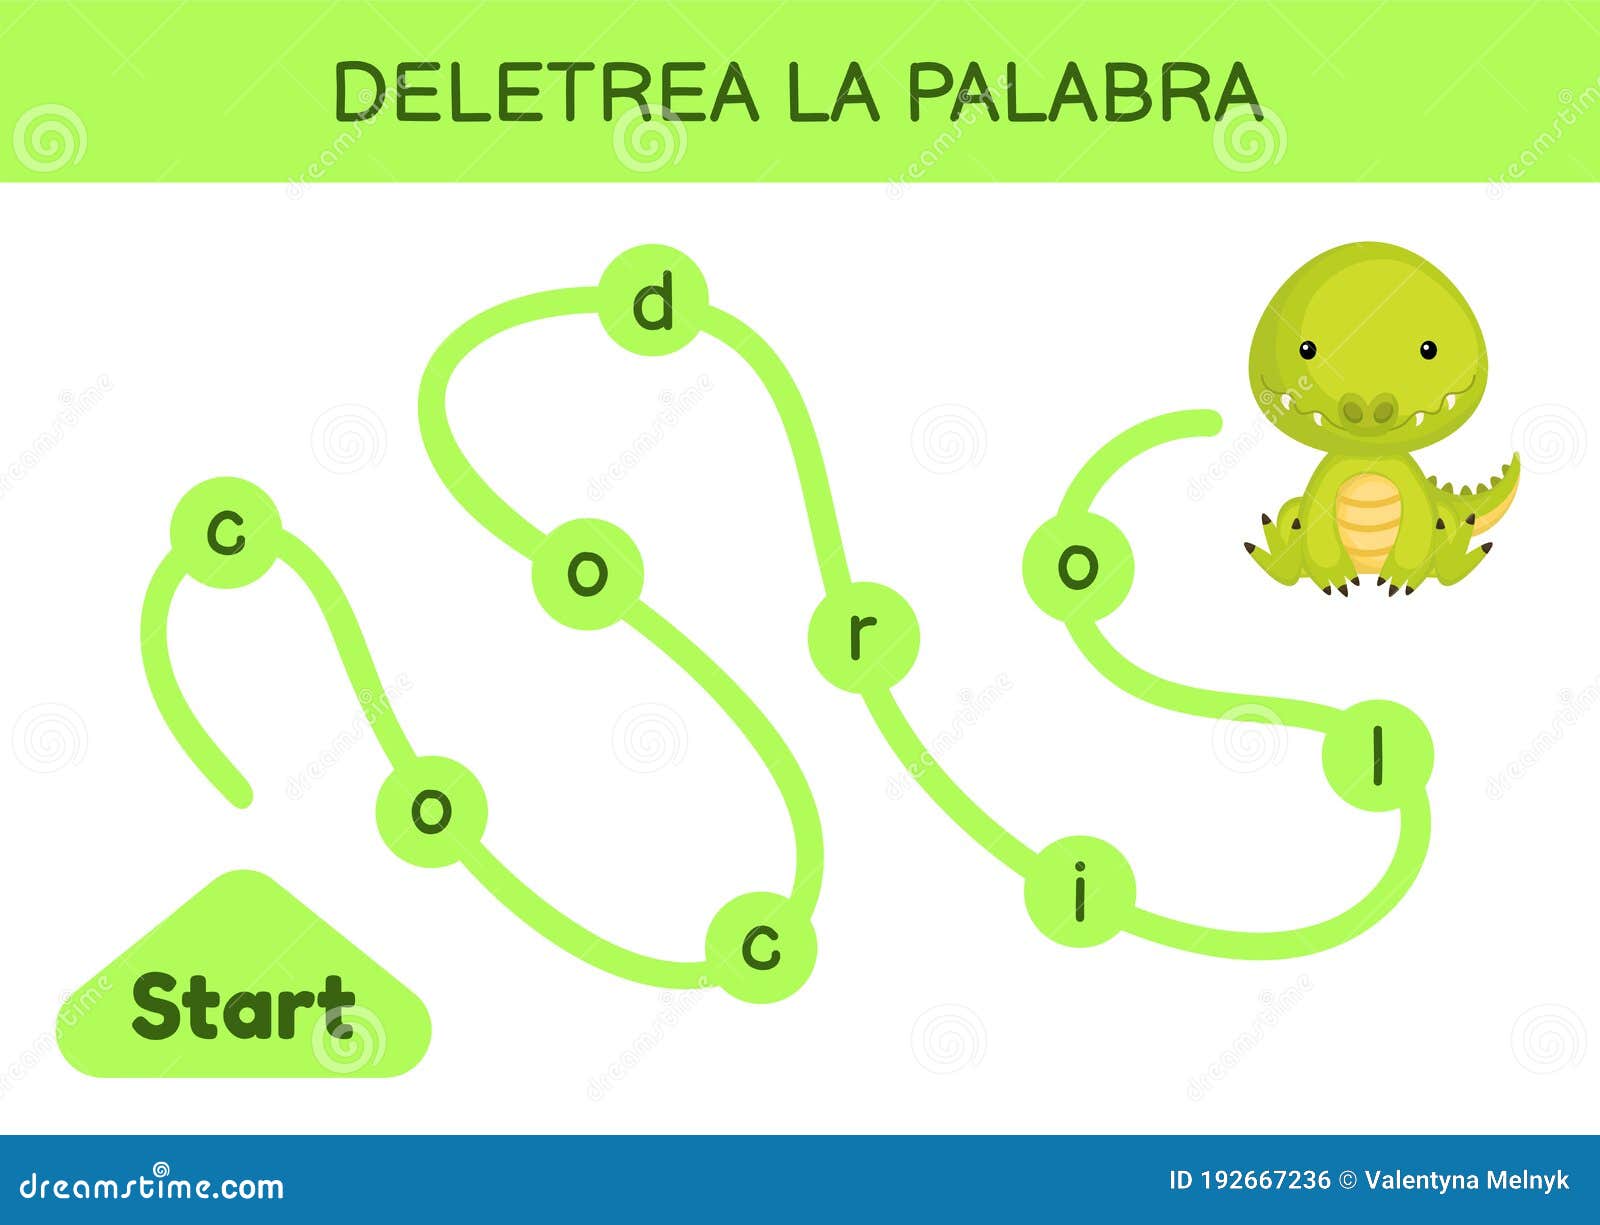 deletrea la palabra - spell the word. maze for kids. spelling word game template. learn to read word crocodile. activity page for